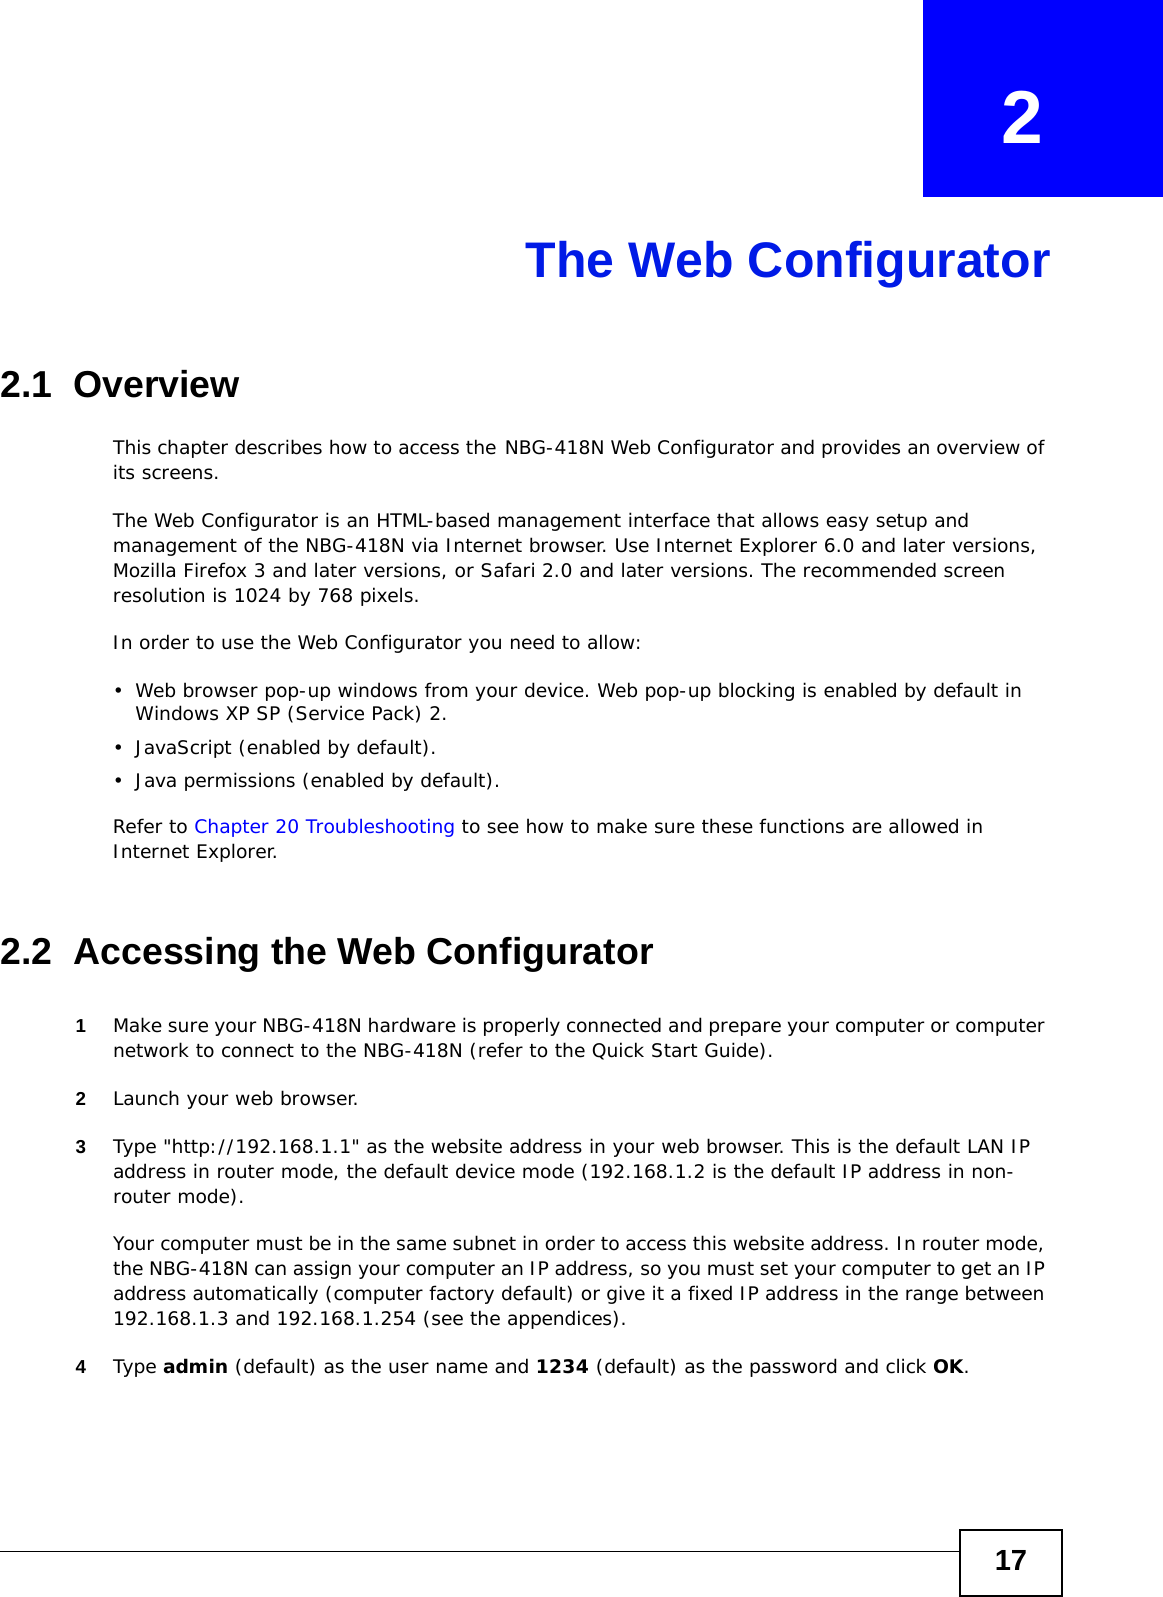 17CHAPTER   2The Web Configurator2.1  OverviewThis chapter describes how to access the NBG-418N Web Configurator and provides an overview of its screens.The Web Configurator is an HTML-based management interface that allows easy setup and management of the NBG-418N via Internet browser. Use Internet Explorer 6.0 and later versions, Mozilla Firefox 3 and later versions, or Safari 2.0 and later versions. The recommended screen resolution is 1024 by 768 pixels.In order to use the Web Configurator you need to allow:• Web browser pop-up windows from your device. Web pop-up blocking is enabled by default in Windows XP SP (Service Pack) 2.• JavaScript (enabled by default).• Java permissions (enabled by default).Refer to Chapter 20 Troubleshooting to see how to make sure these functions are allowed in Internet Explorer.2.2  Accessing the Web Configurator1Make sure your NBG-418N hardware is properly connected and prepare your computer or computer network to connect to the NBG-418N (refer to the Quick Start Guide).2Launch your web browser.3Type &quot;http://192.168.1.1&quot; as the website address in your web browser. This is the default LAN IP address in router mode, the default device mode (192.168.1.2 is the default IP address in non-router mode).Your computer must be in the same subnet in order to access this website address. In router mode, the NBG-418N can assign your computer an IP address, so you must set your computer to get an IP address automatically (computer factory default) or give it a fixed IP address in the range between 192.168.1.3 and 192.168.1.254 (see the appendices).4Type admin (default) as the user name and 1234 (default) as the password and click OK. 